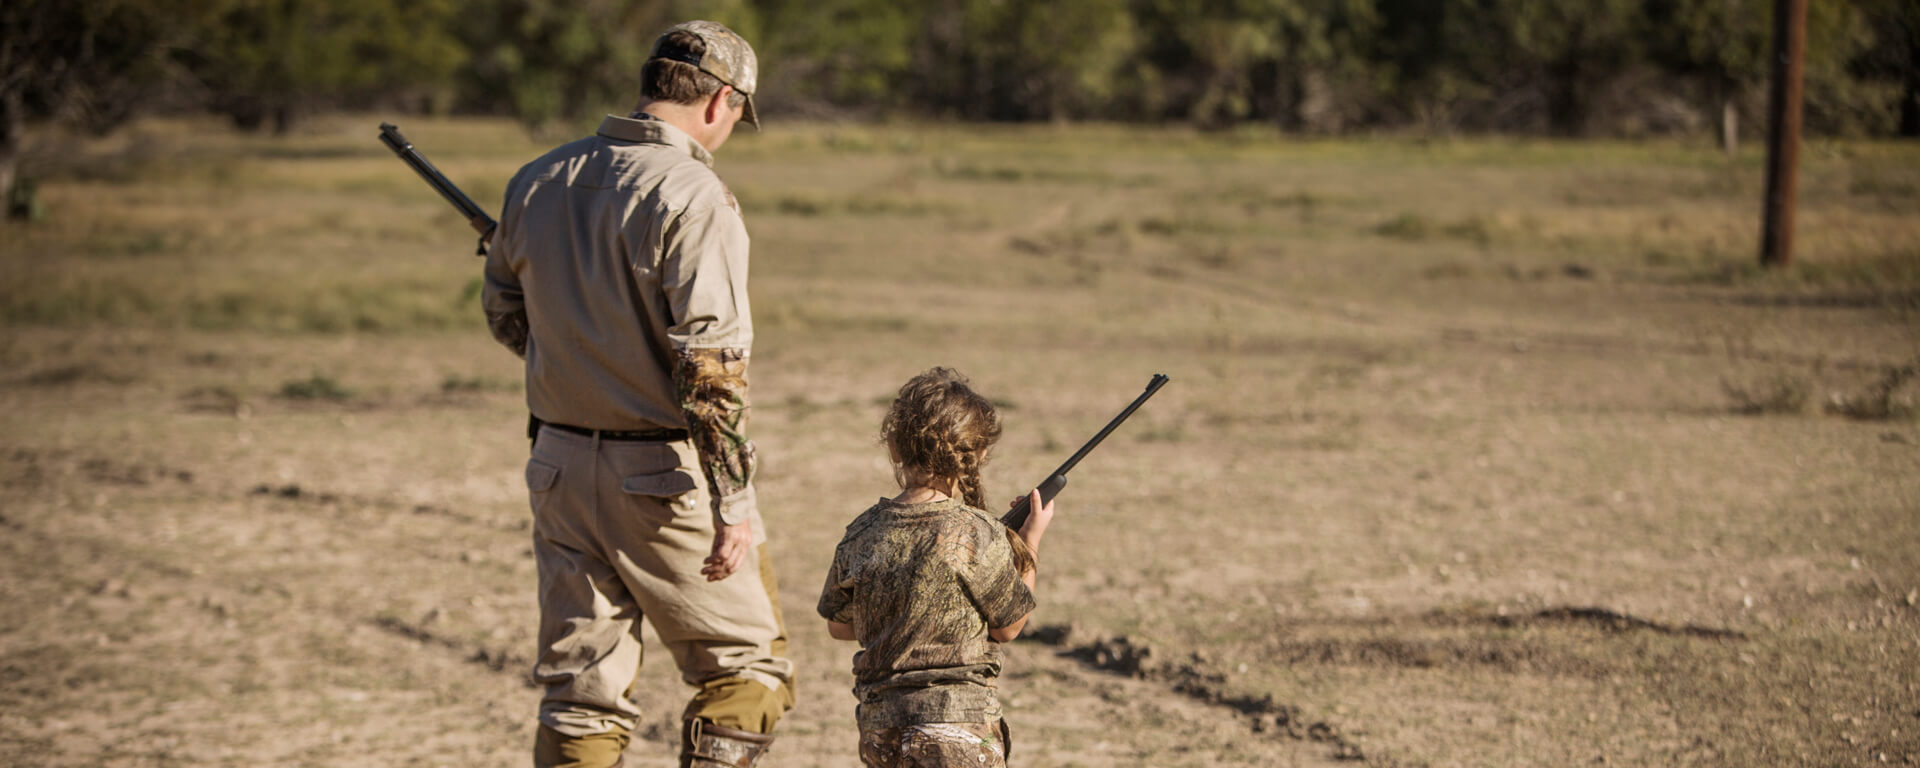 Hunting Father and Daughter using Evans Outdoors products